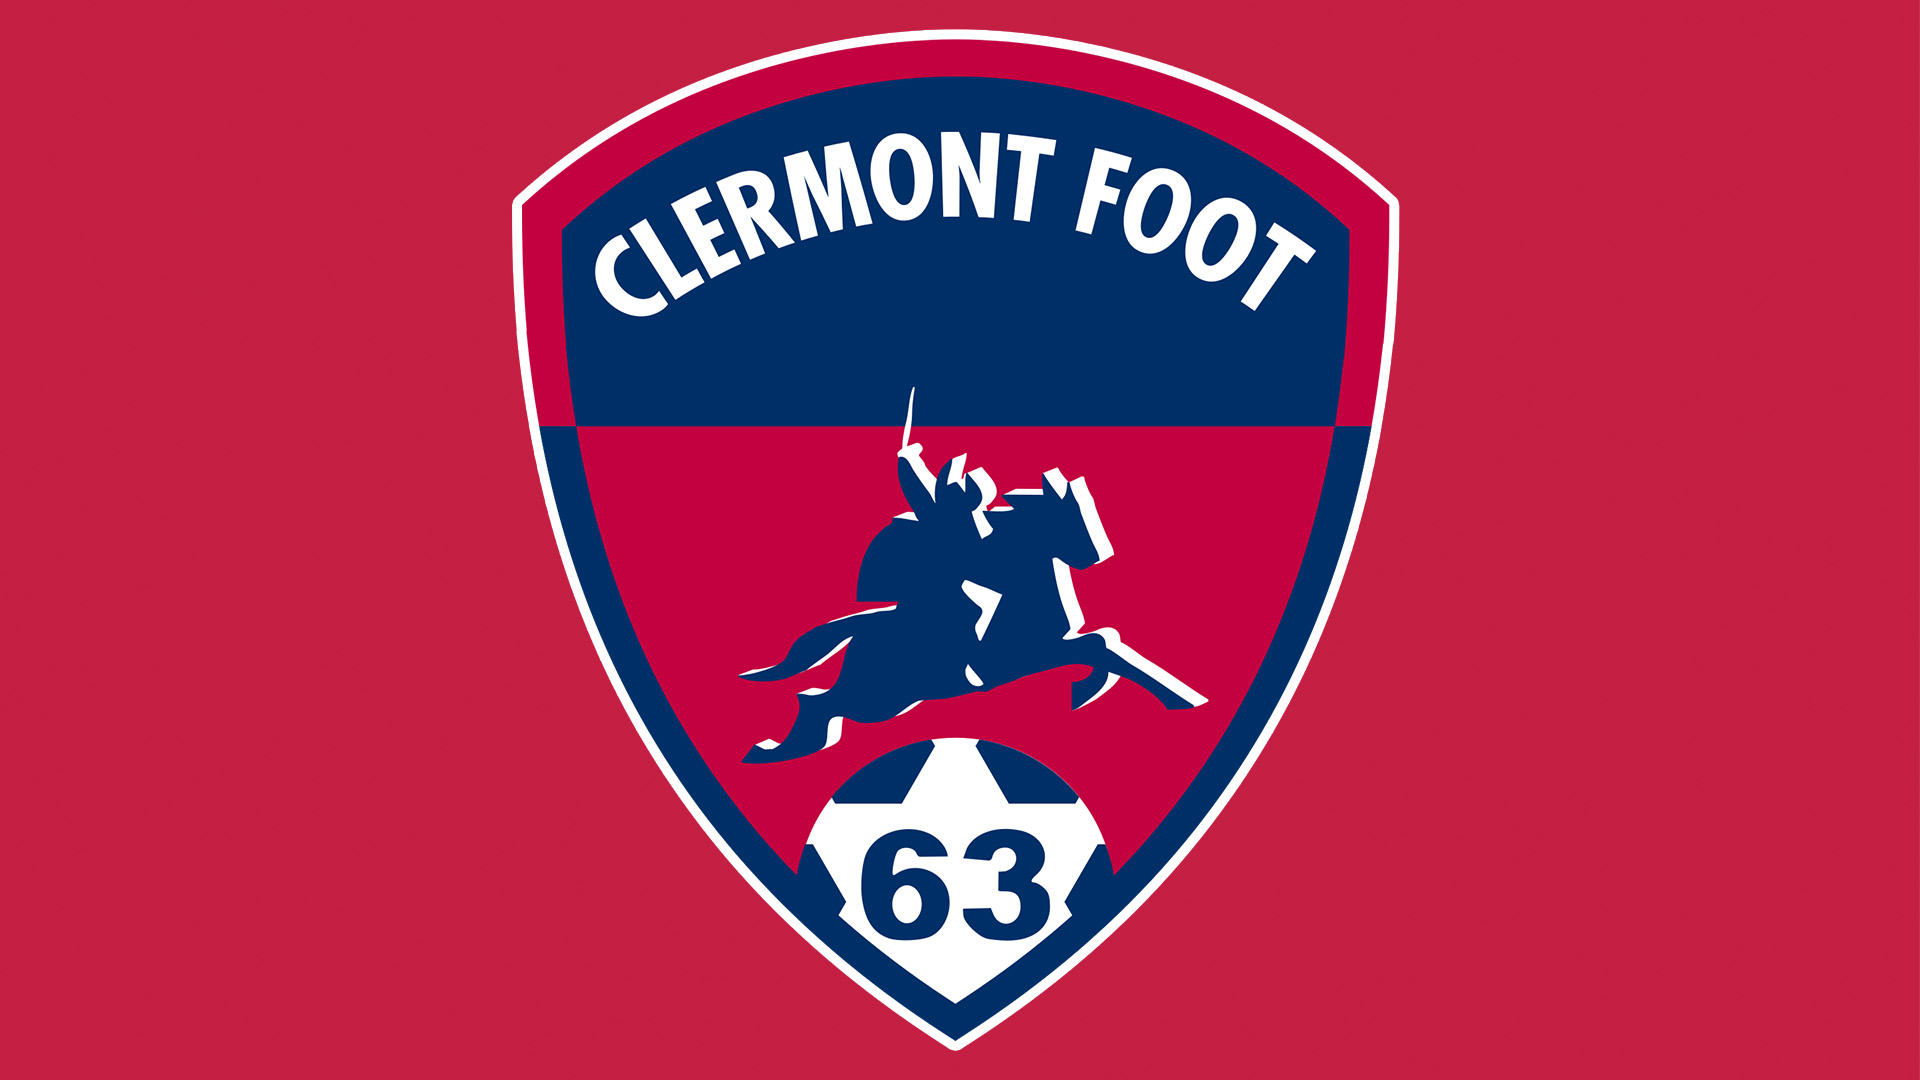 Clermont Foot 63 vs USL Dunkerque